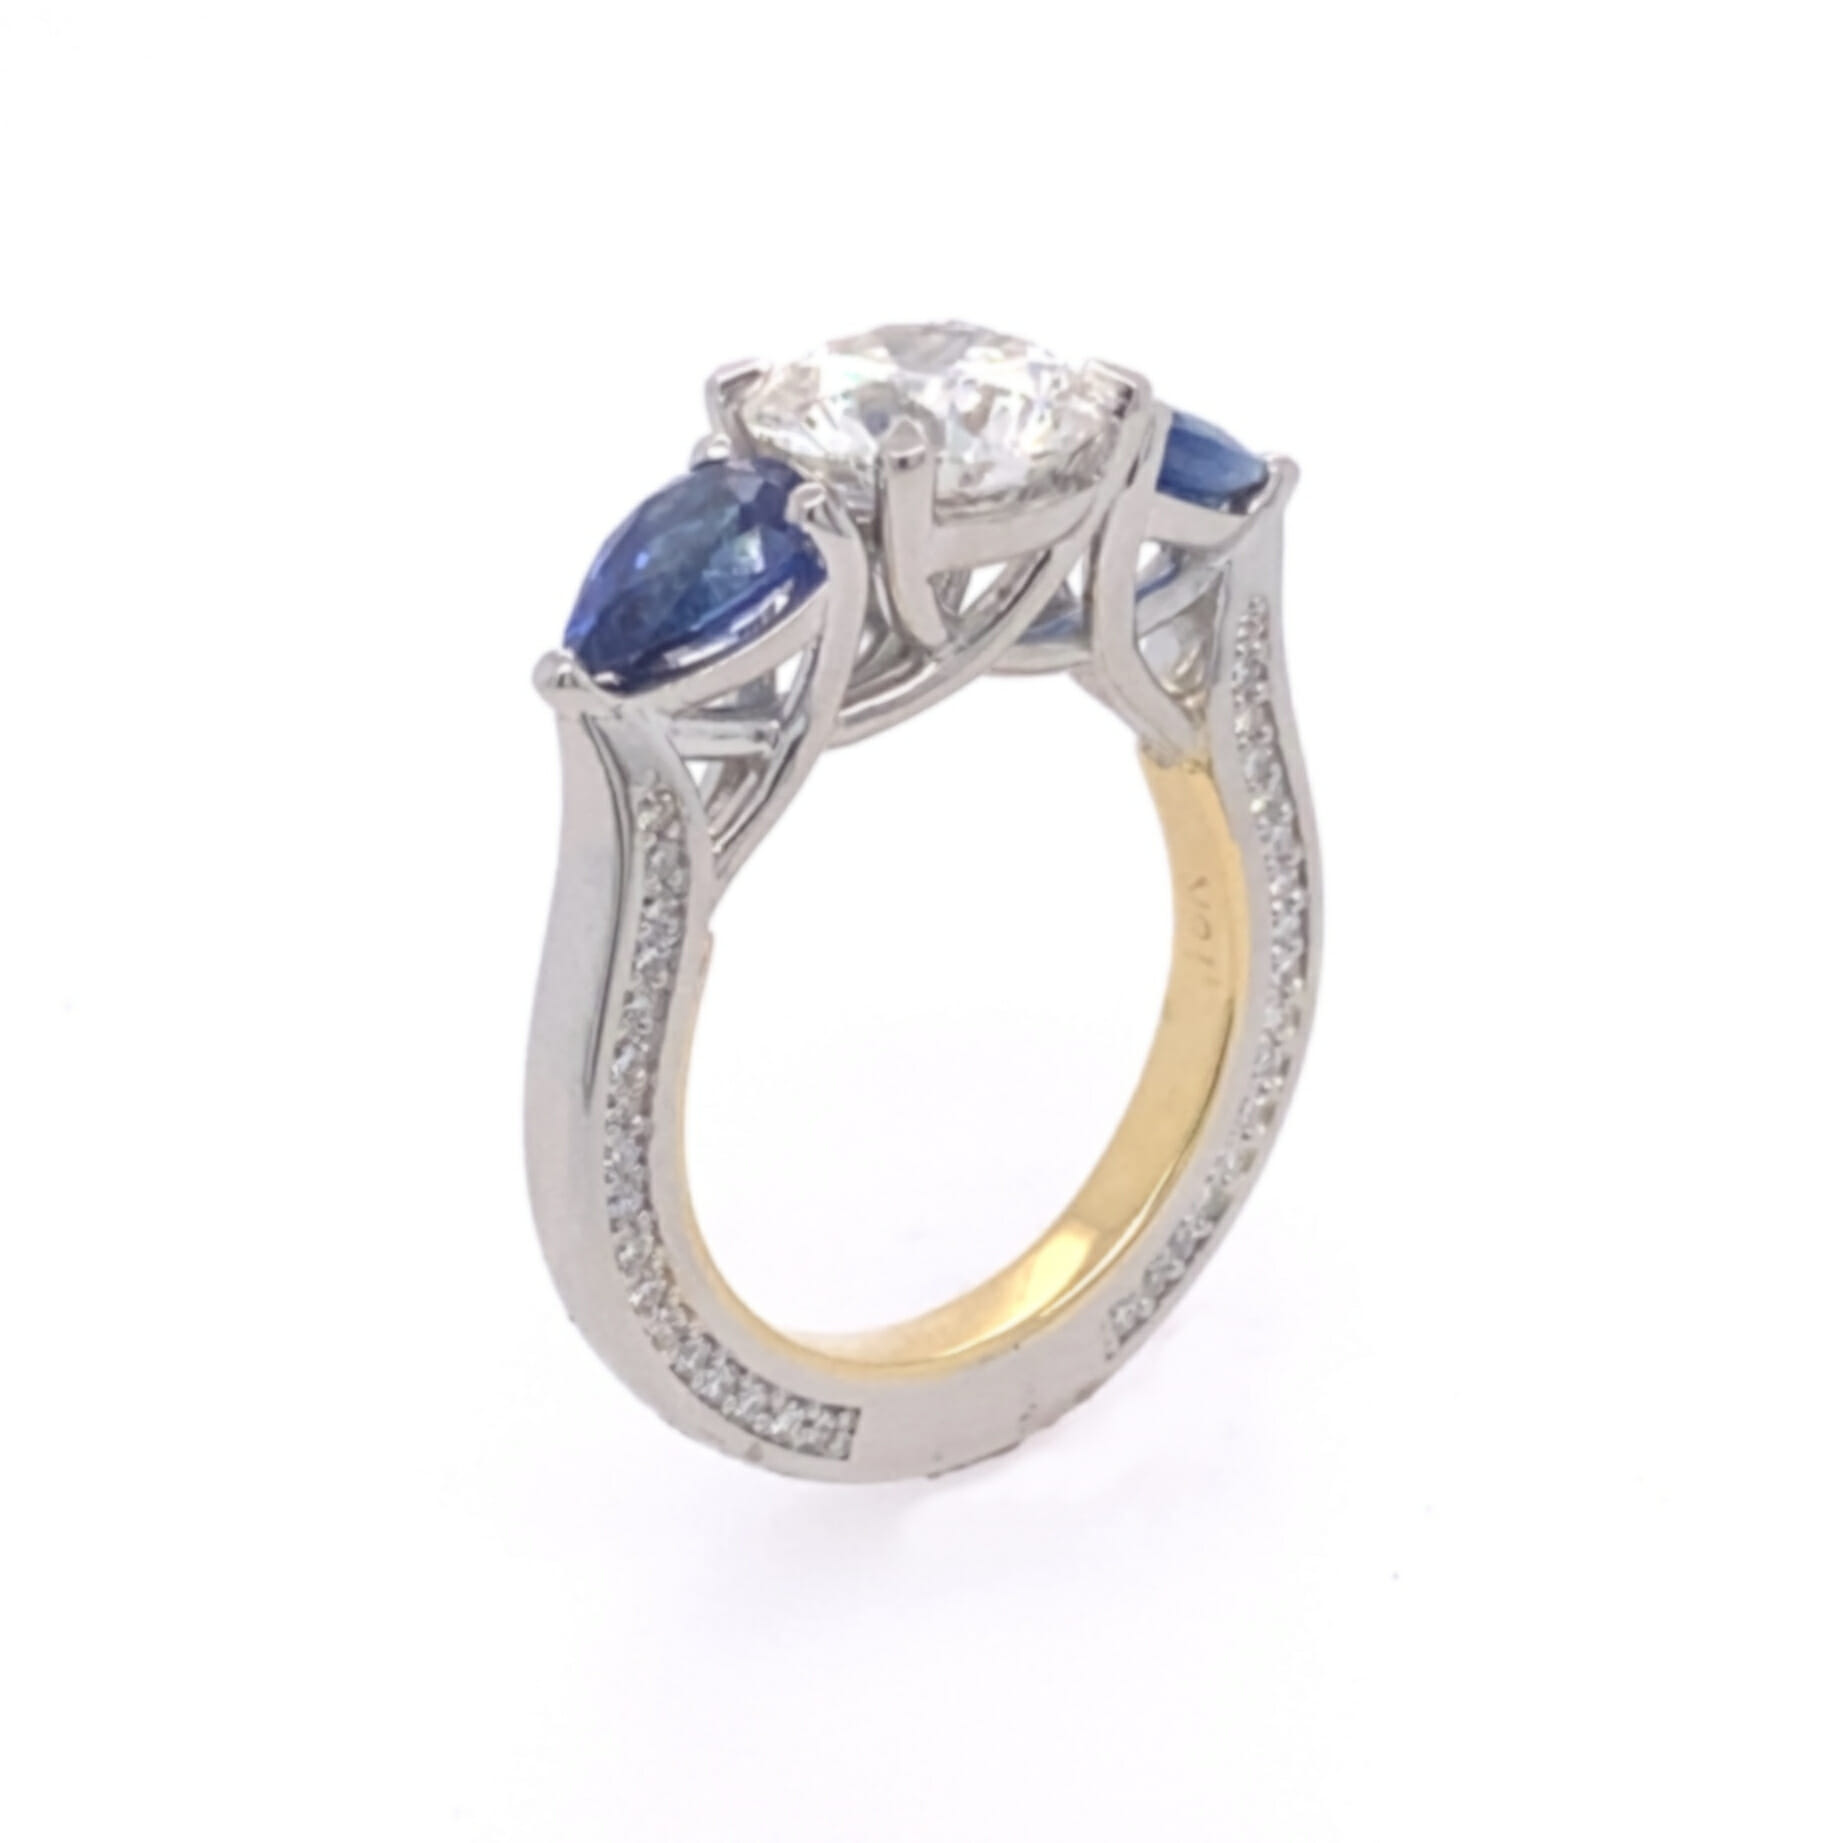 diamond and sapphire three stone engagement ring by keezing kreations